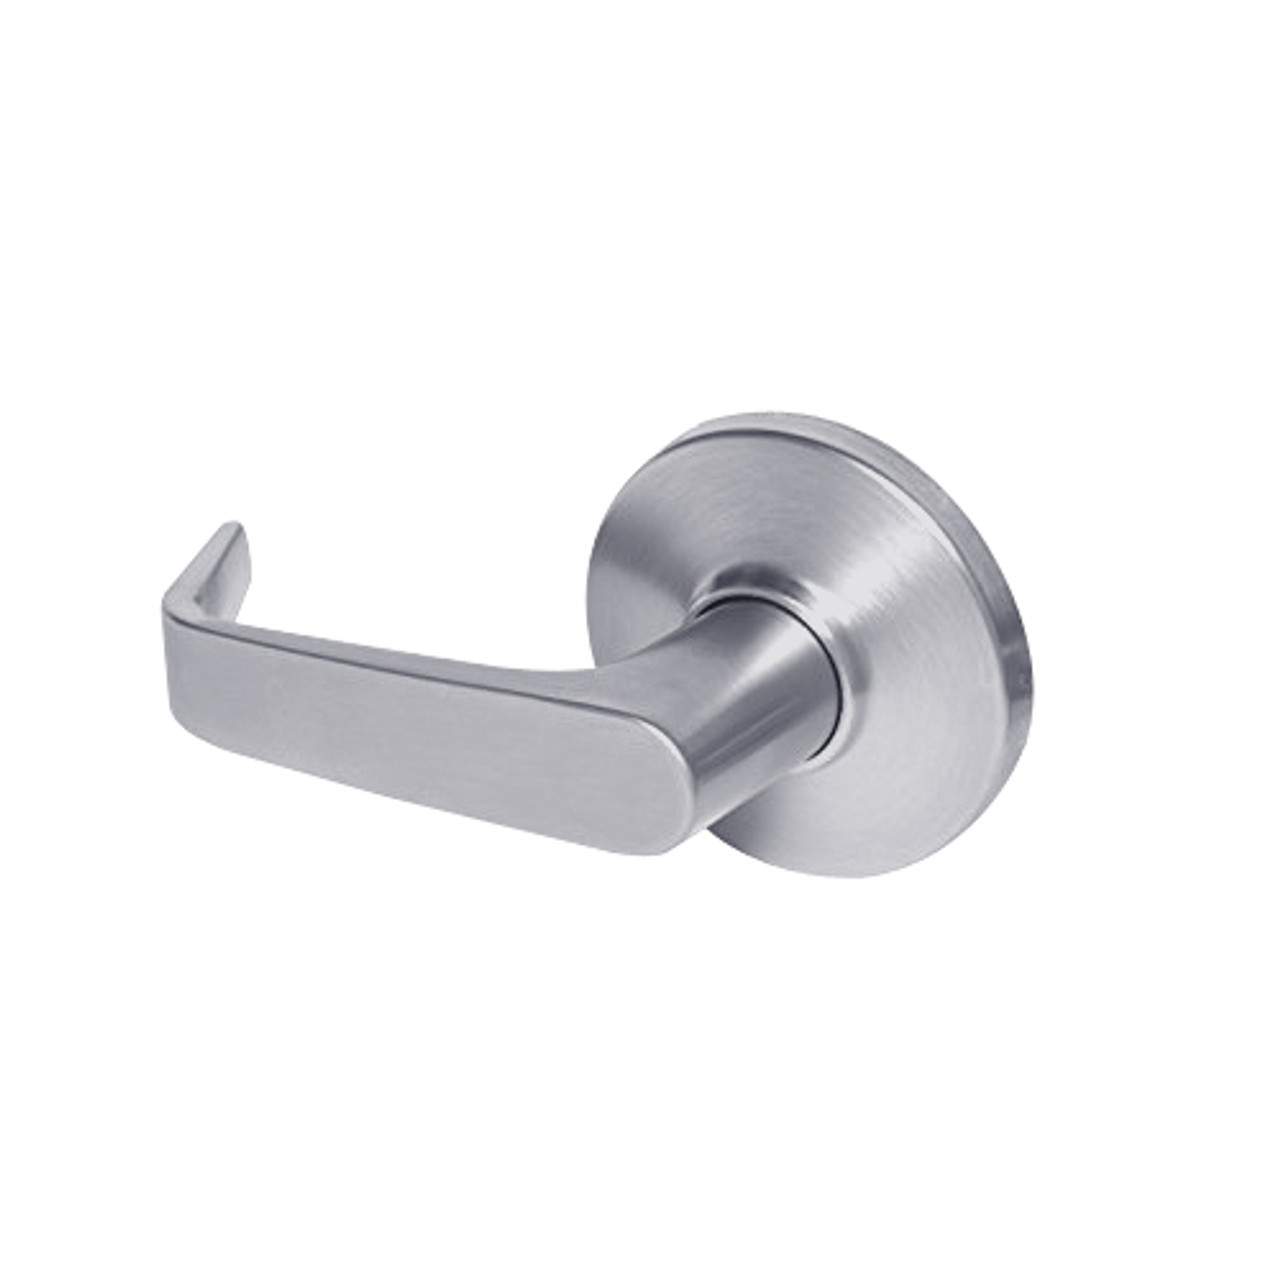 9K30Y15DS3626 Best 9K Series Exit Heavy Duty Cylindrical Lever Locks with Contour Angle with Return Lever Design in Satin Chrome